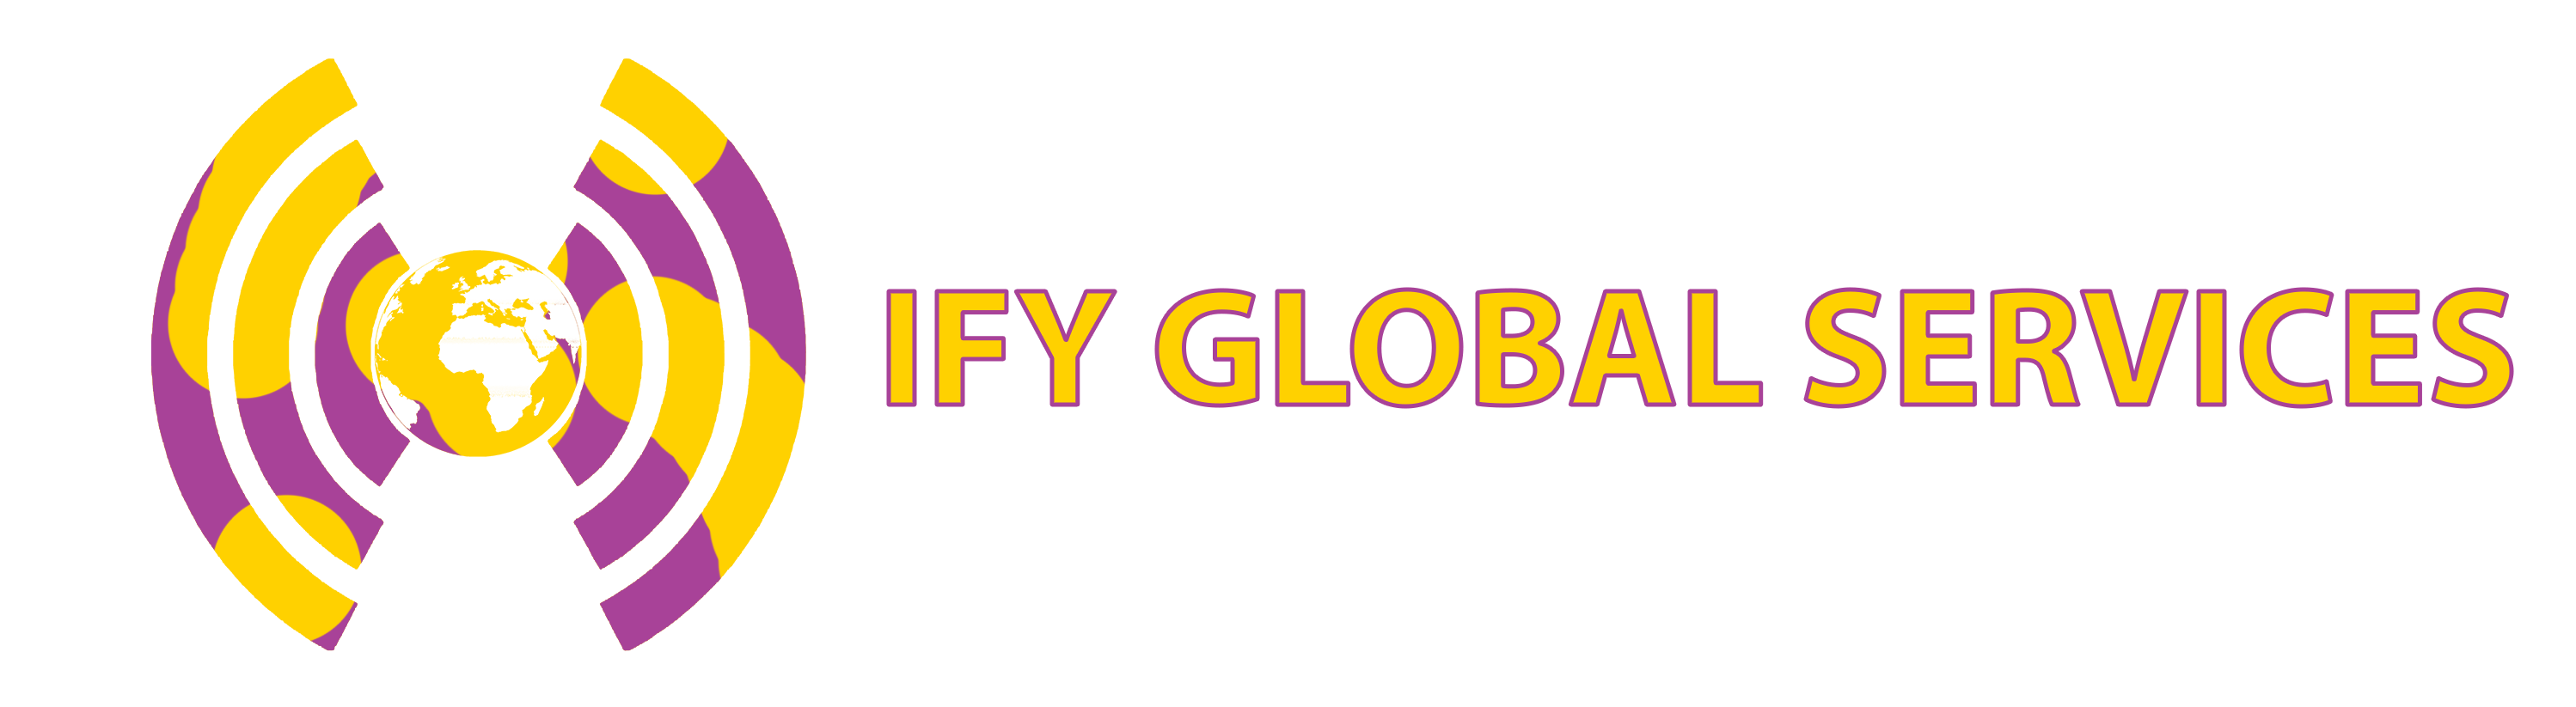 IFY GLOBAL SERVICES